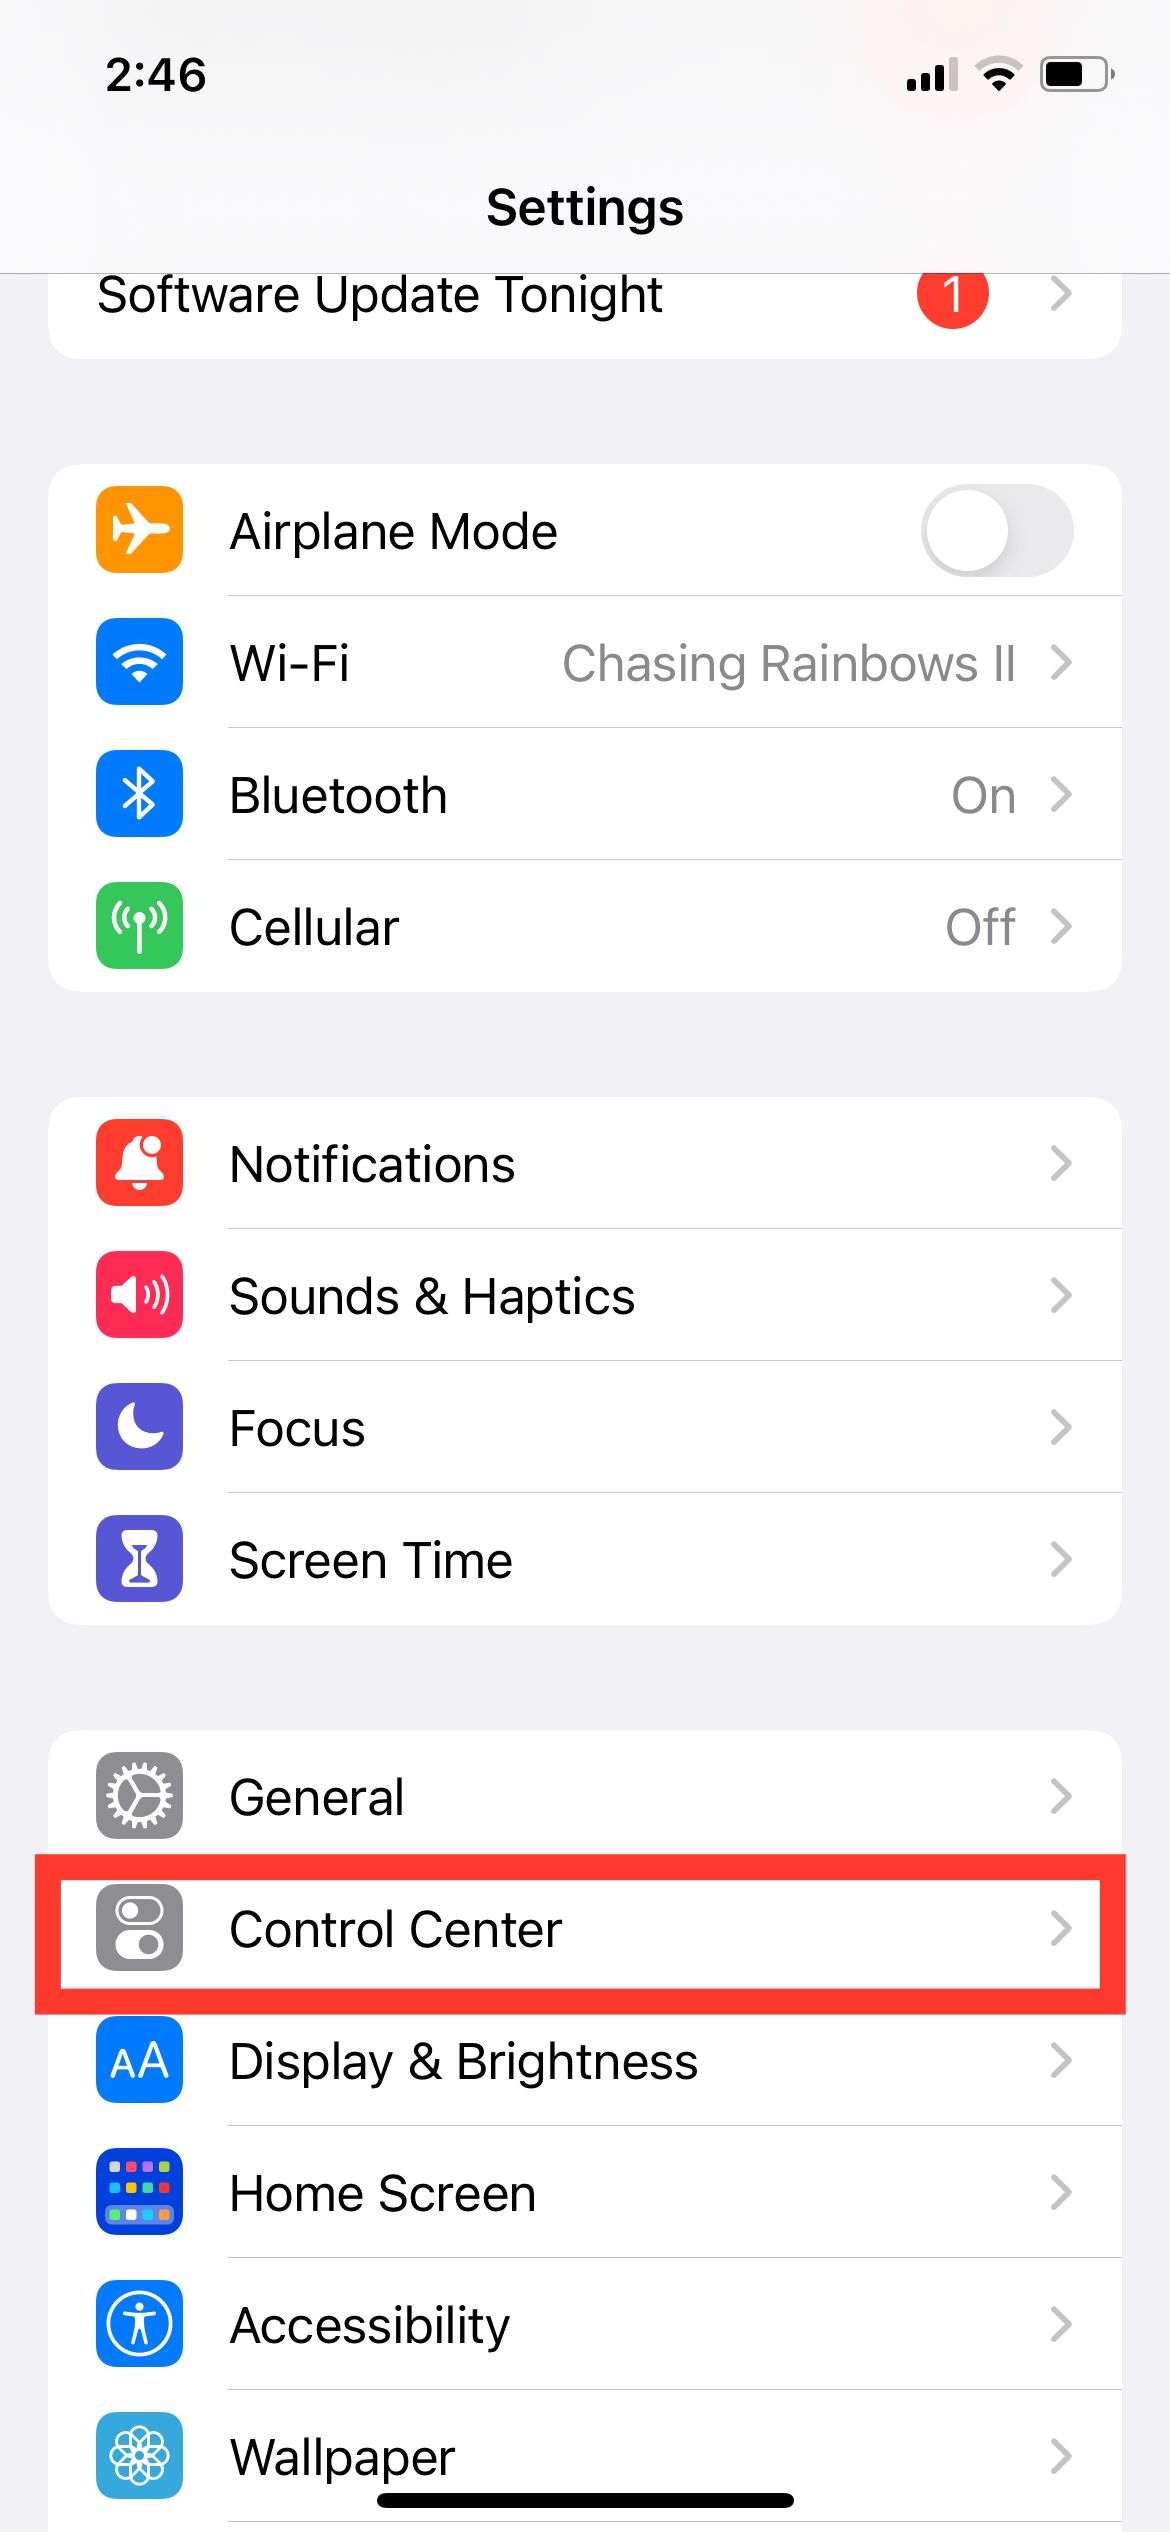 Control Center on Settings